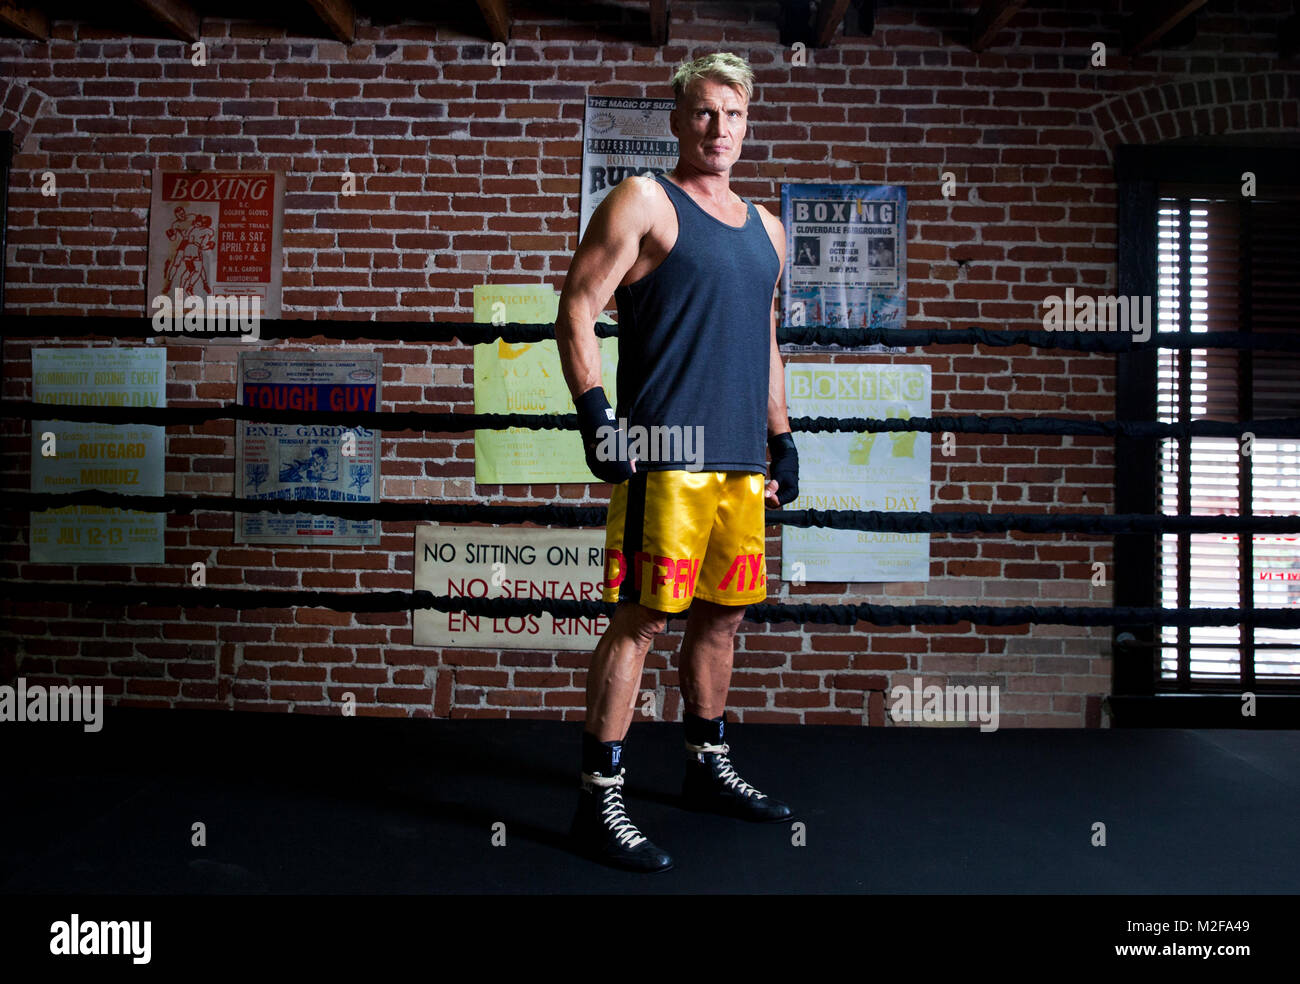 Los Angeles, California, USA. 9th June, 2015. DOLPH LUNDGREN Swedish actor, director, screenwriter, producer, and martial artist, works out in a gym. Credit: Brian Lowe/ZUMA Wire/ZUMAPRESS.com/Alamy Live News Stock Photo